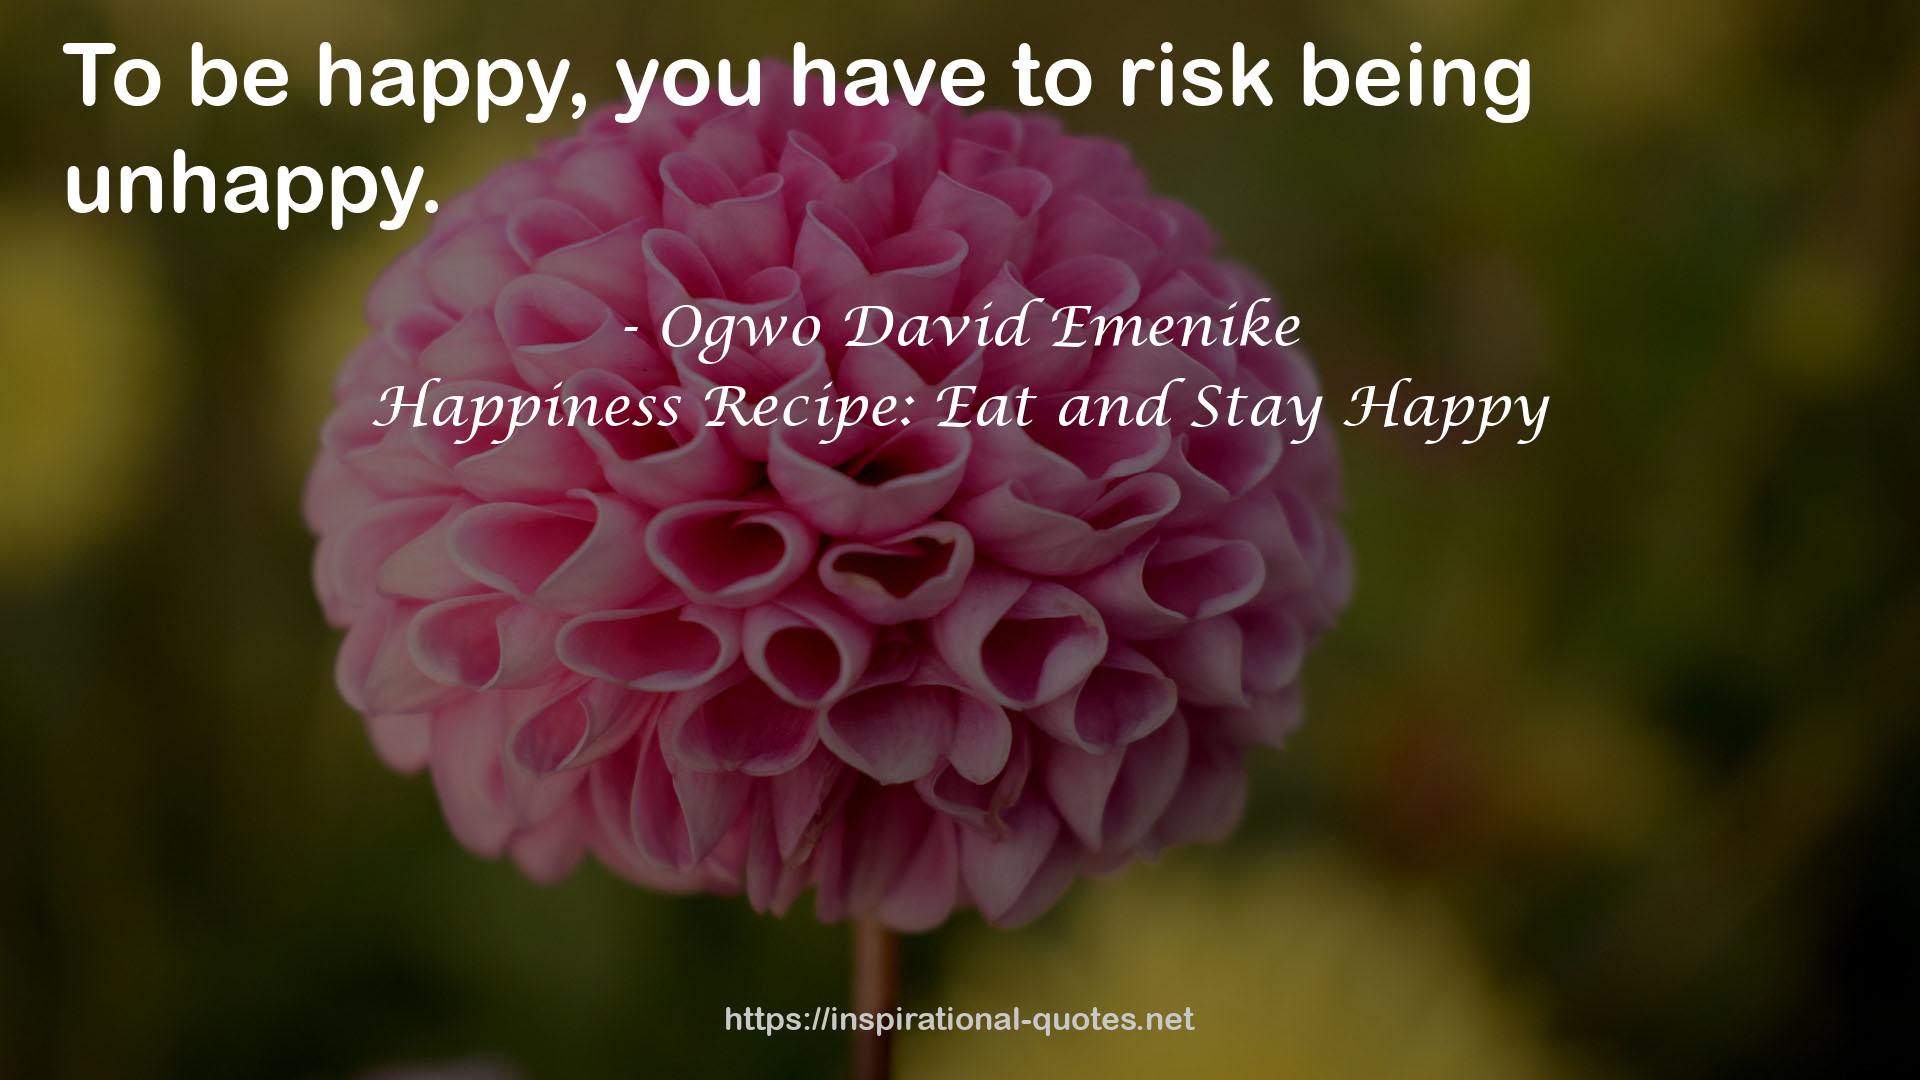 Happiness Recipe: Eat and Stay Happy QUOTES